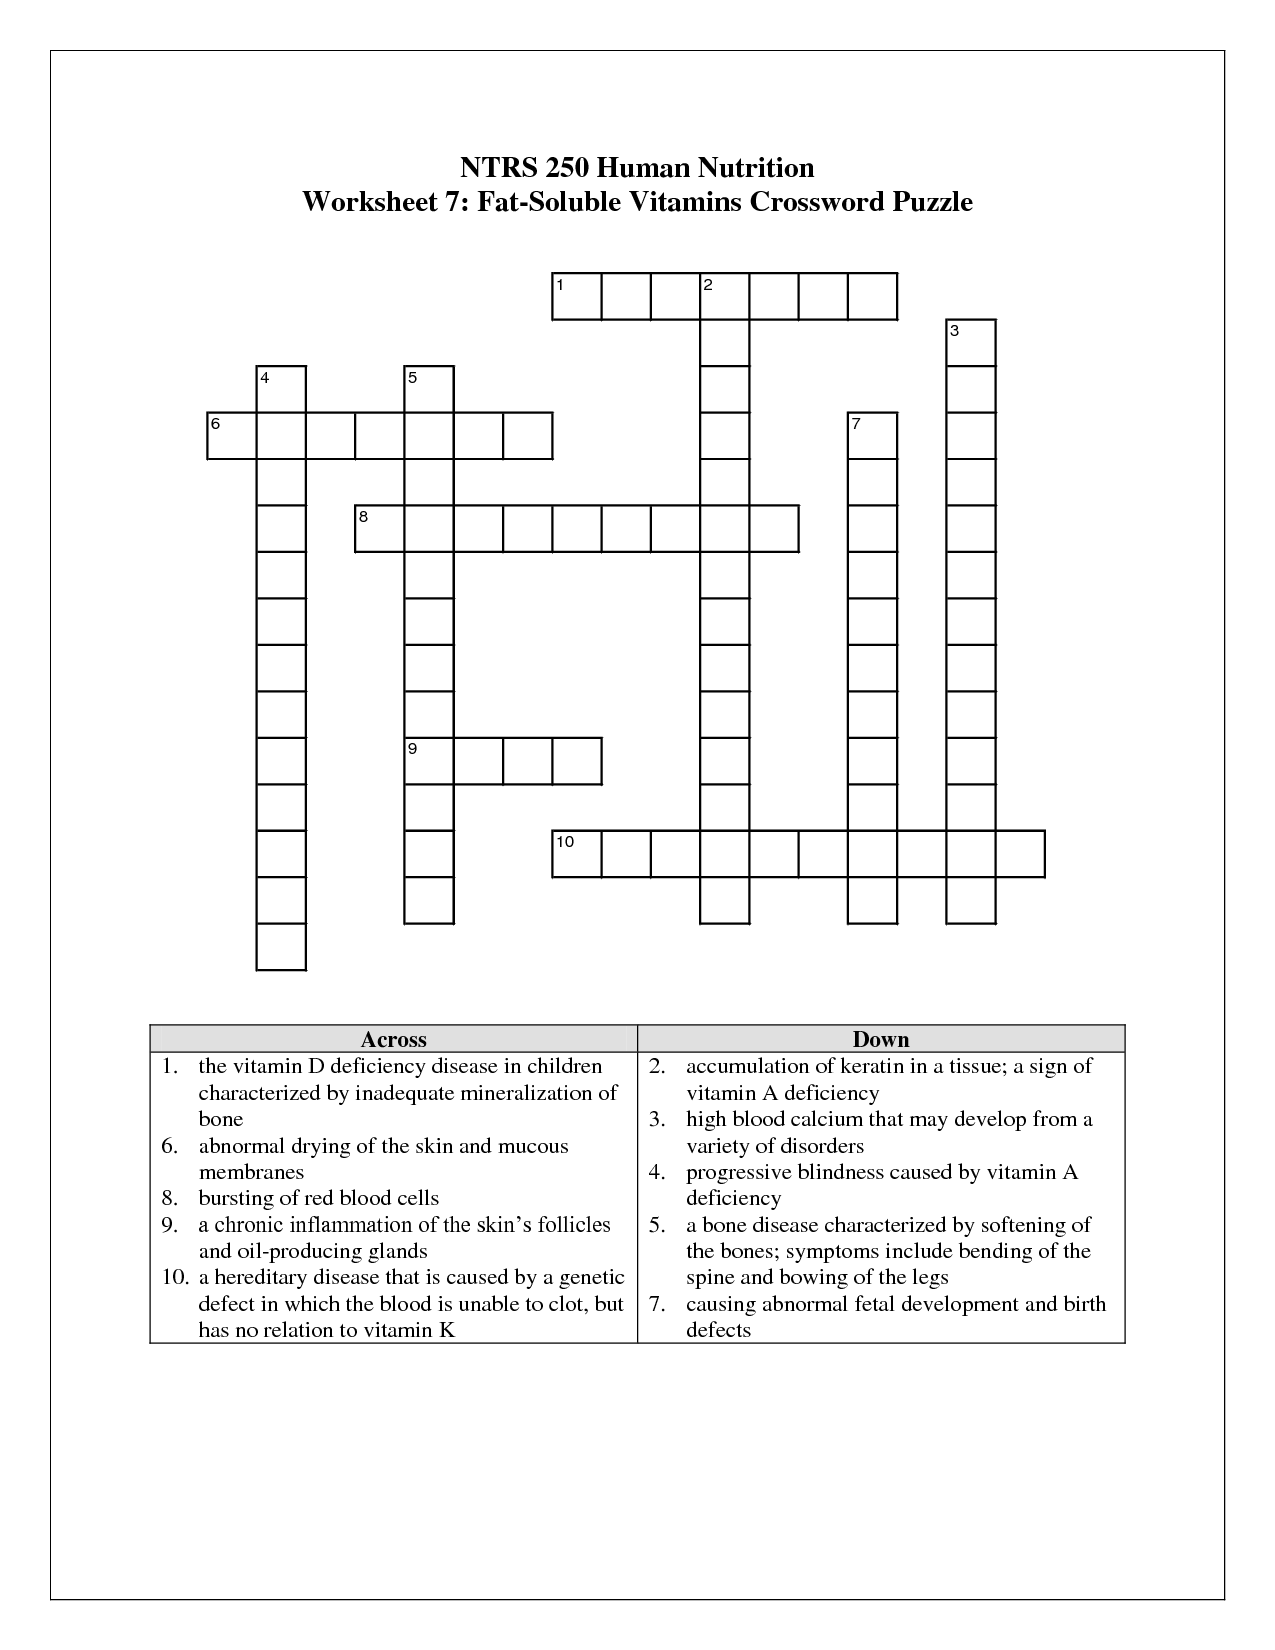 Crossword Puzzle Worksheets Image